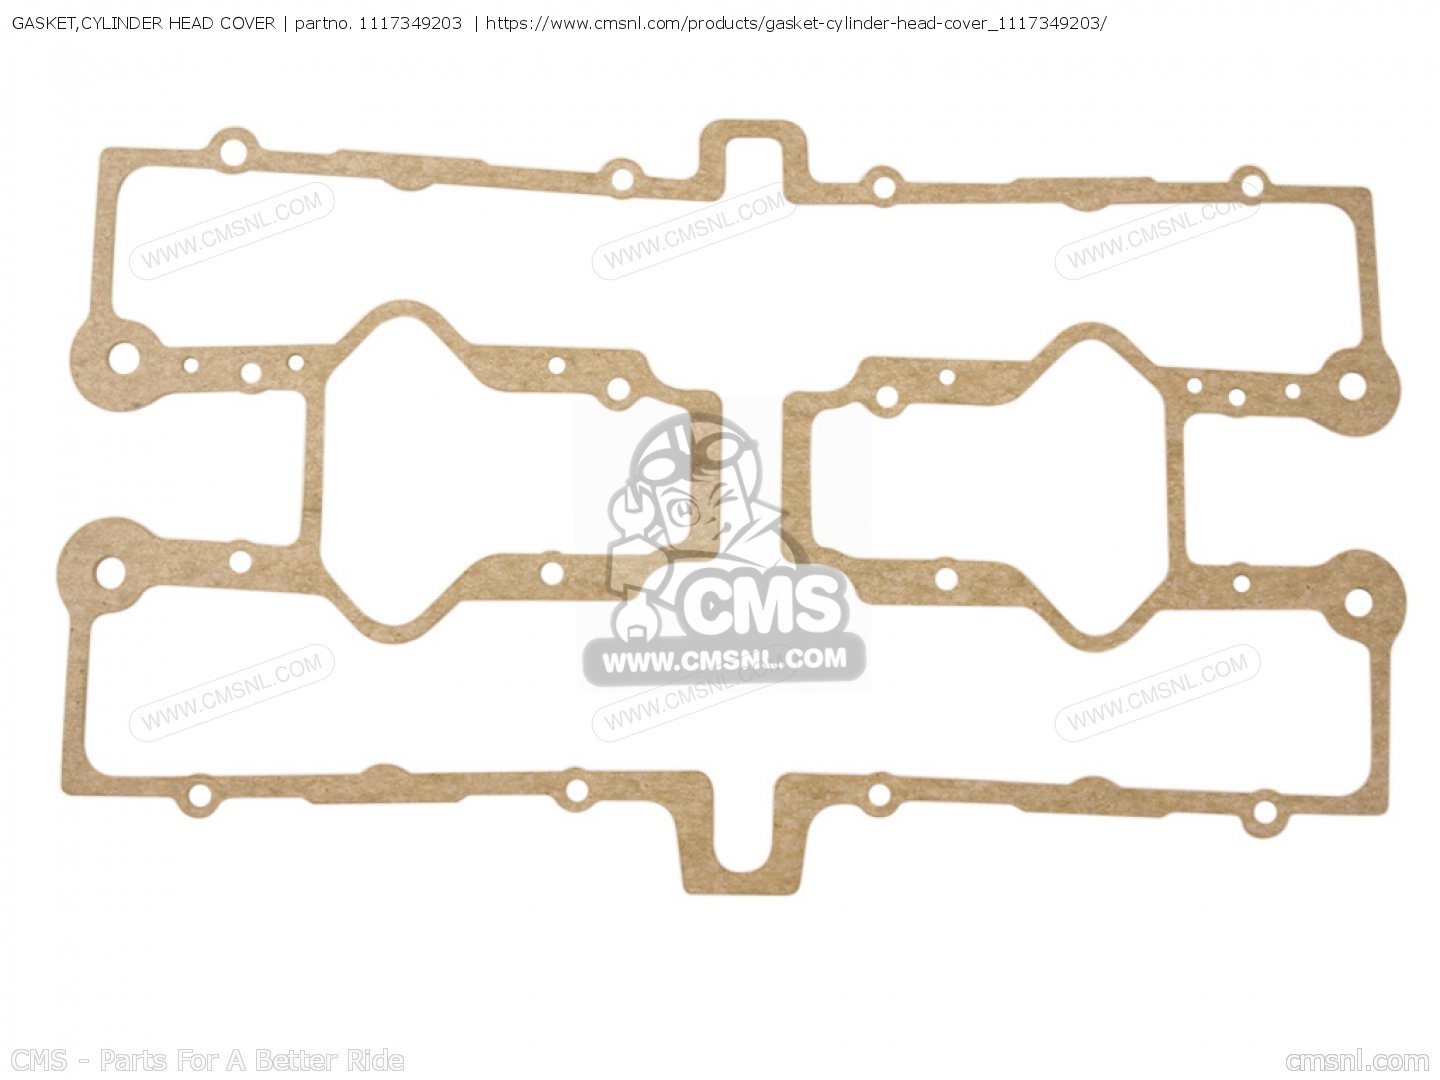 Gasket Cylinder Head Cover  Mca  For Gsx1100 1980  T